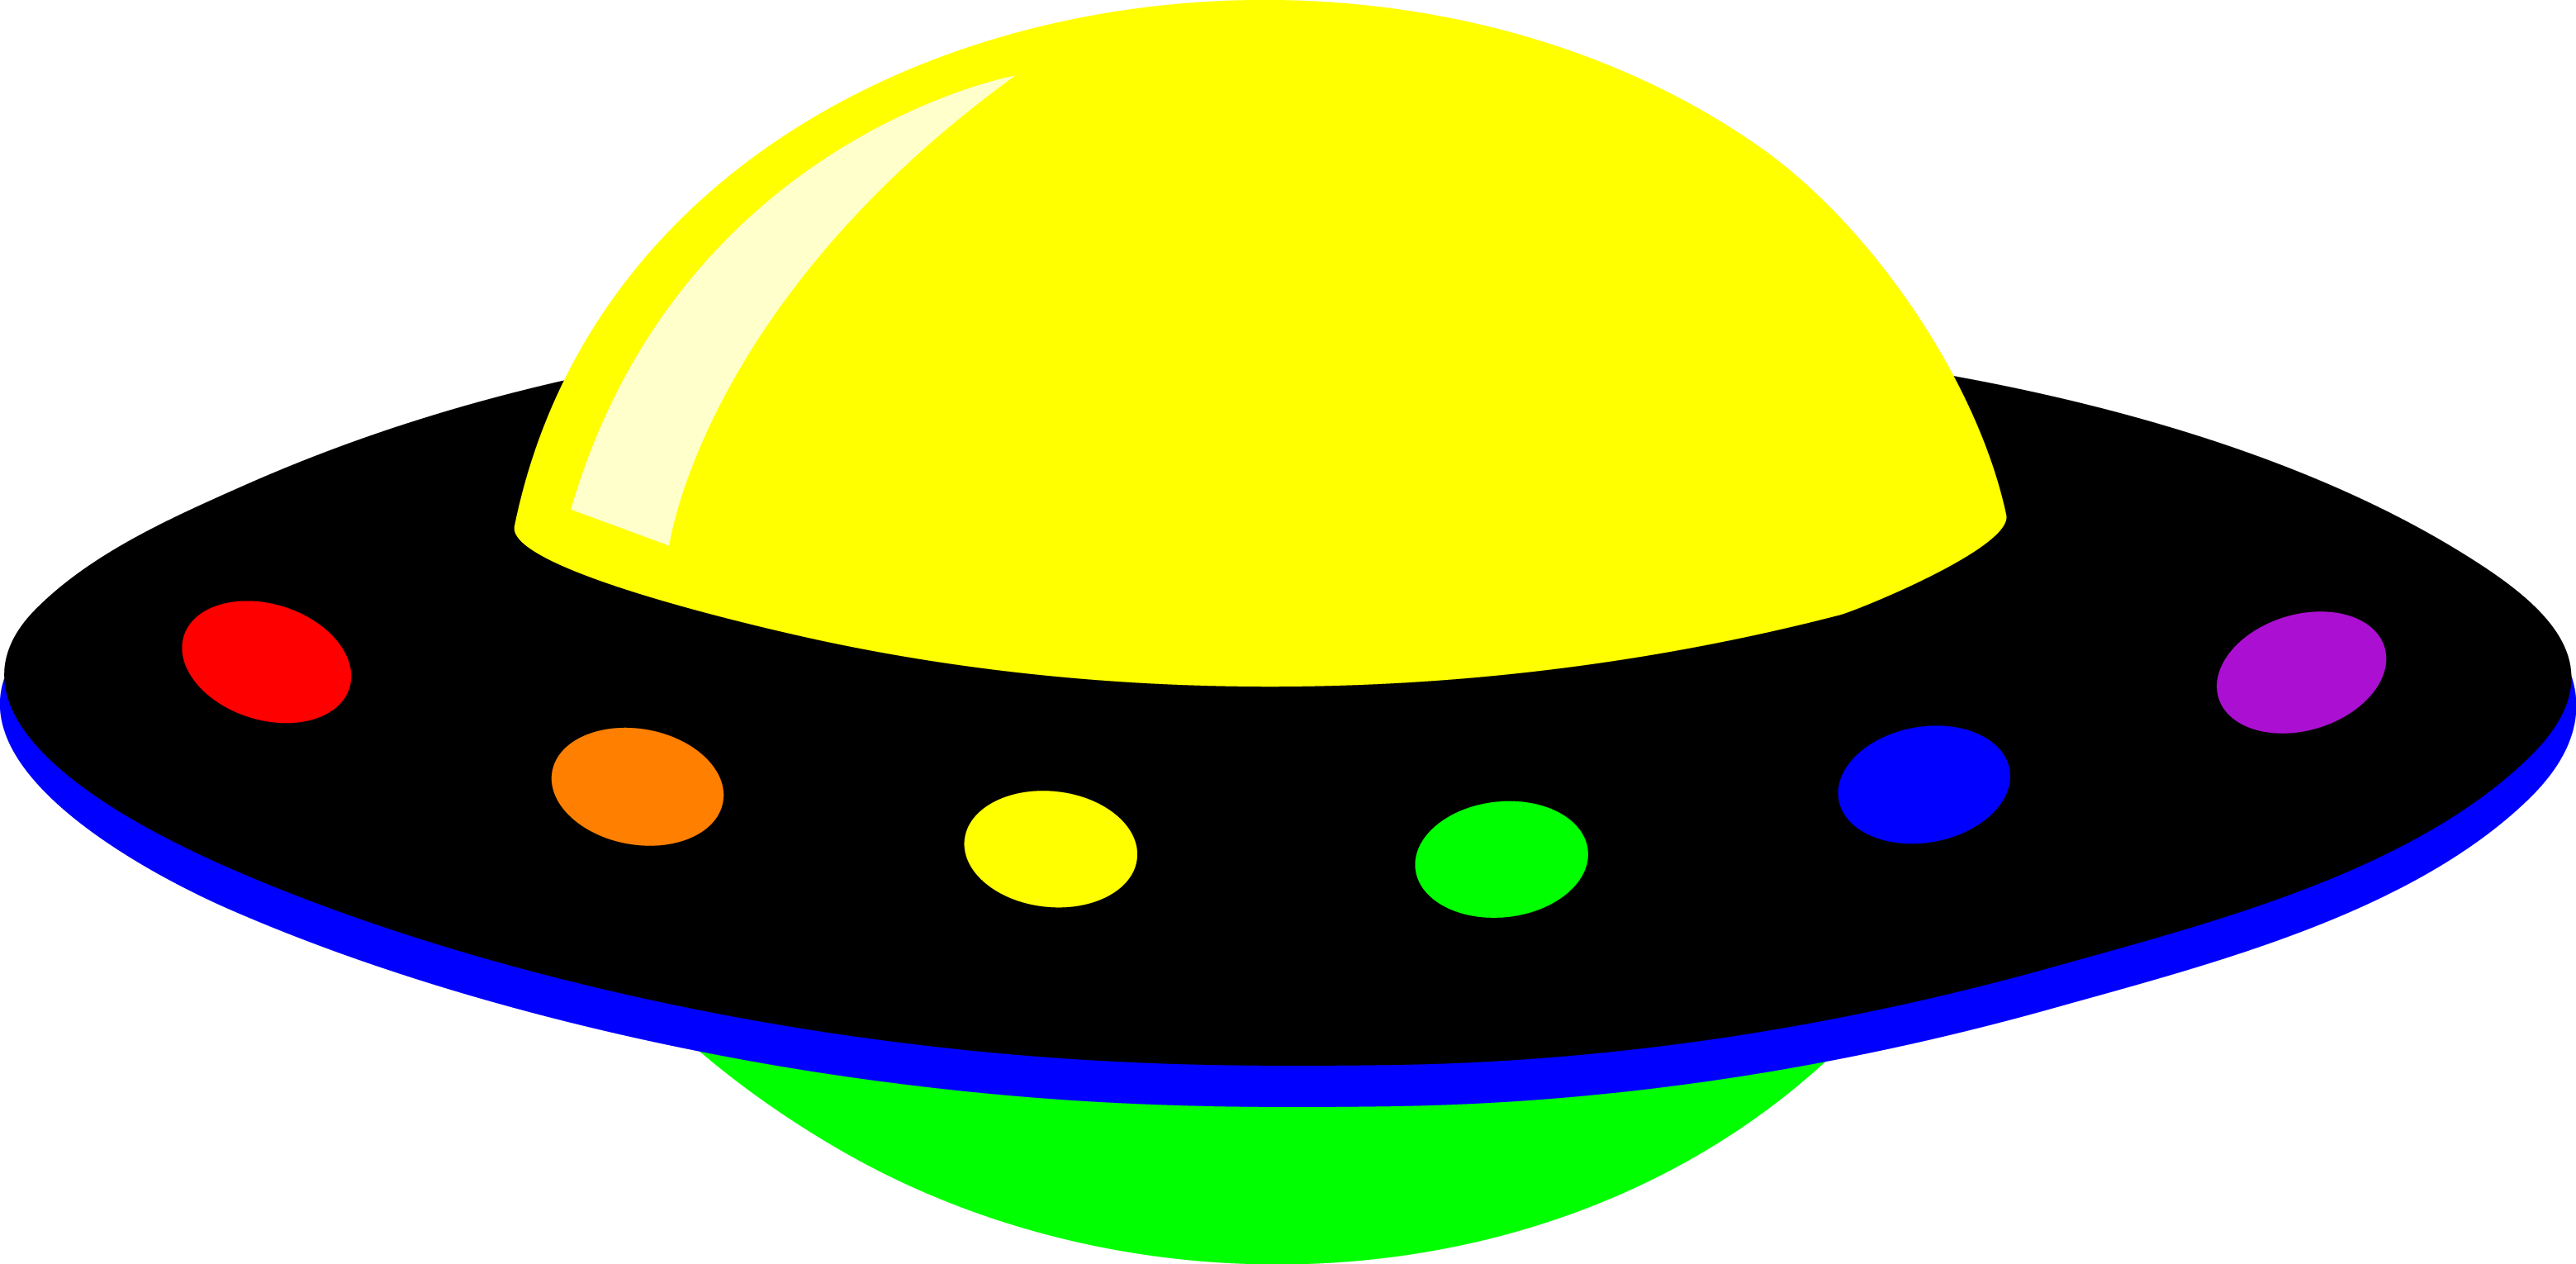 Outer Space Clipart - Cliparts.co